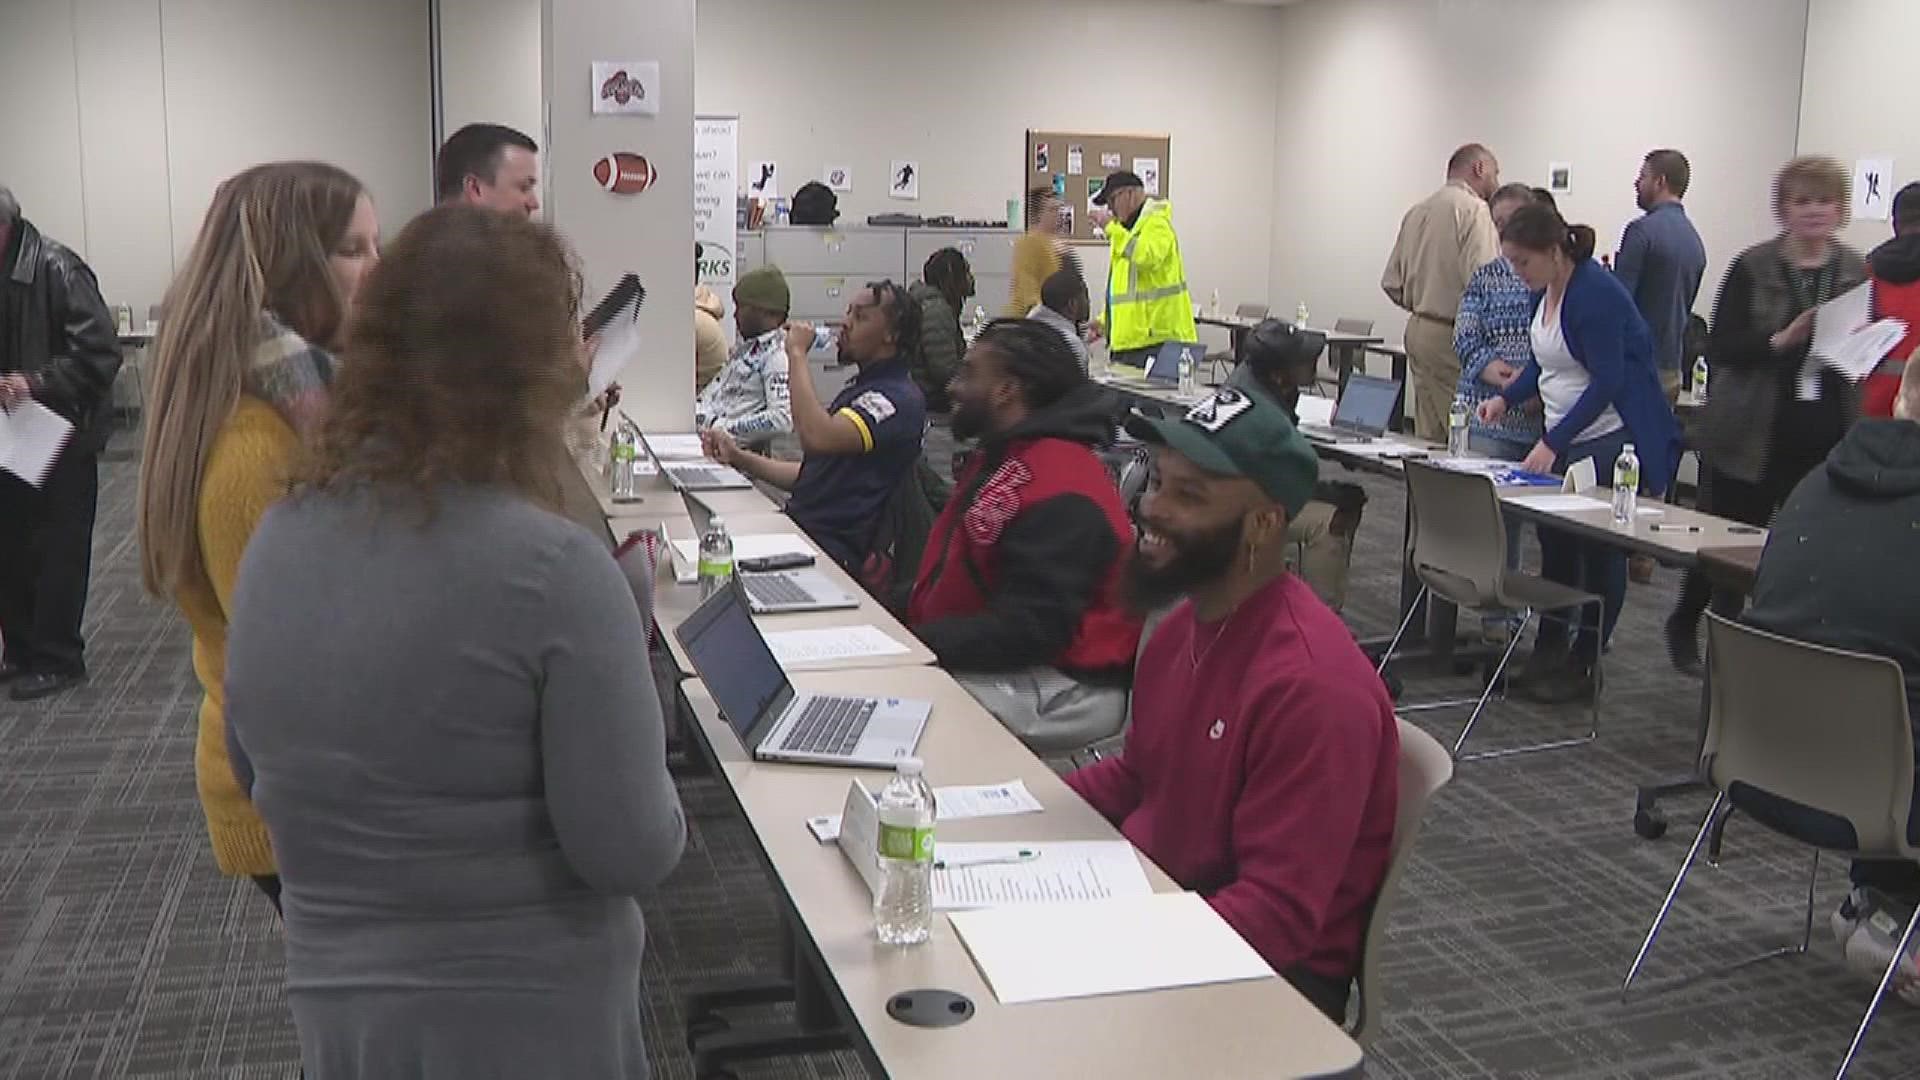 The private event was held for Steamwheelers players looking for extra work in the Quad Cities.